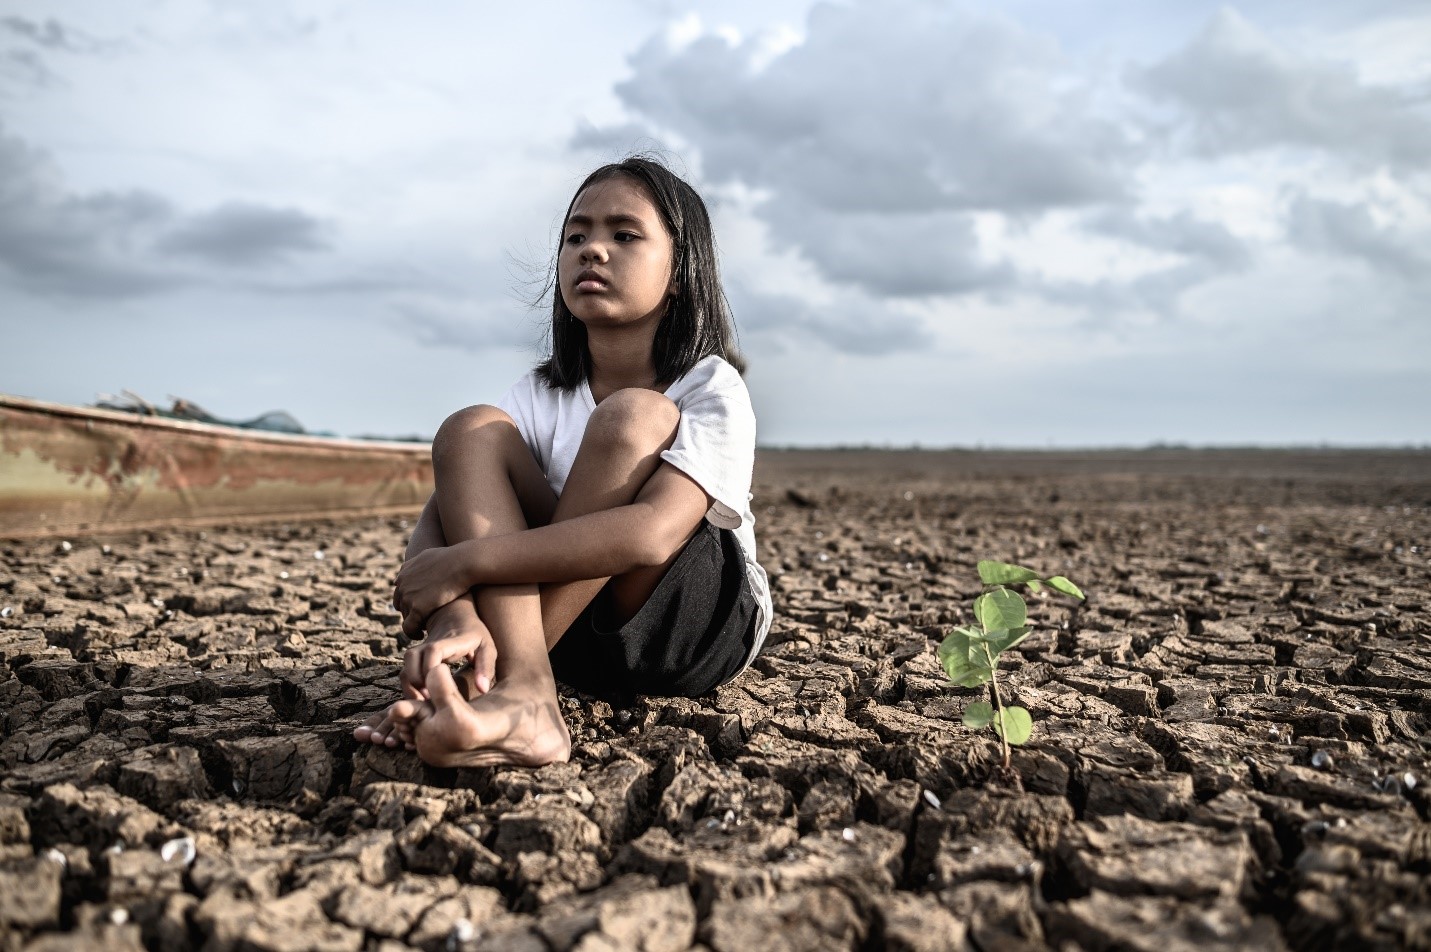 a small girl sitting on an area affected by drought